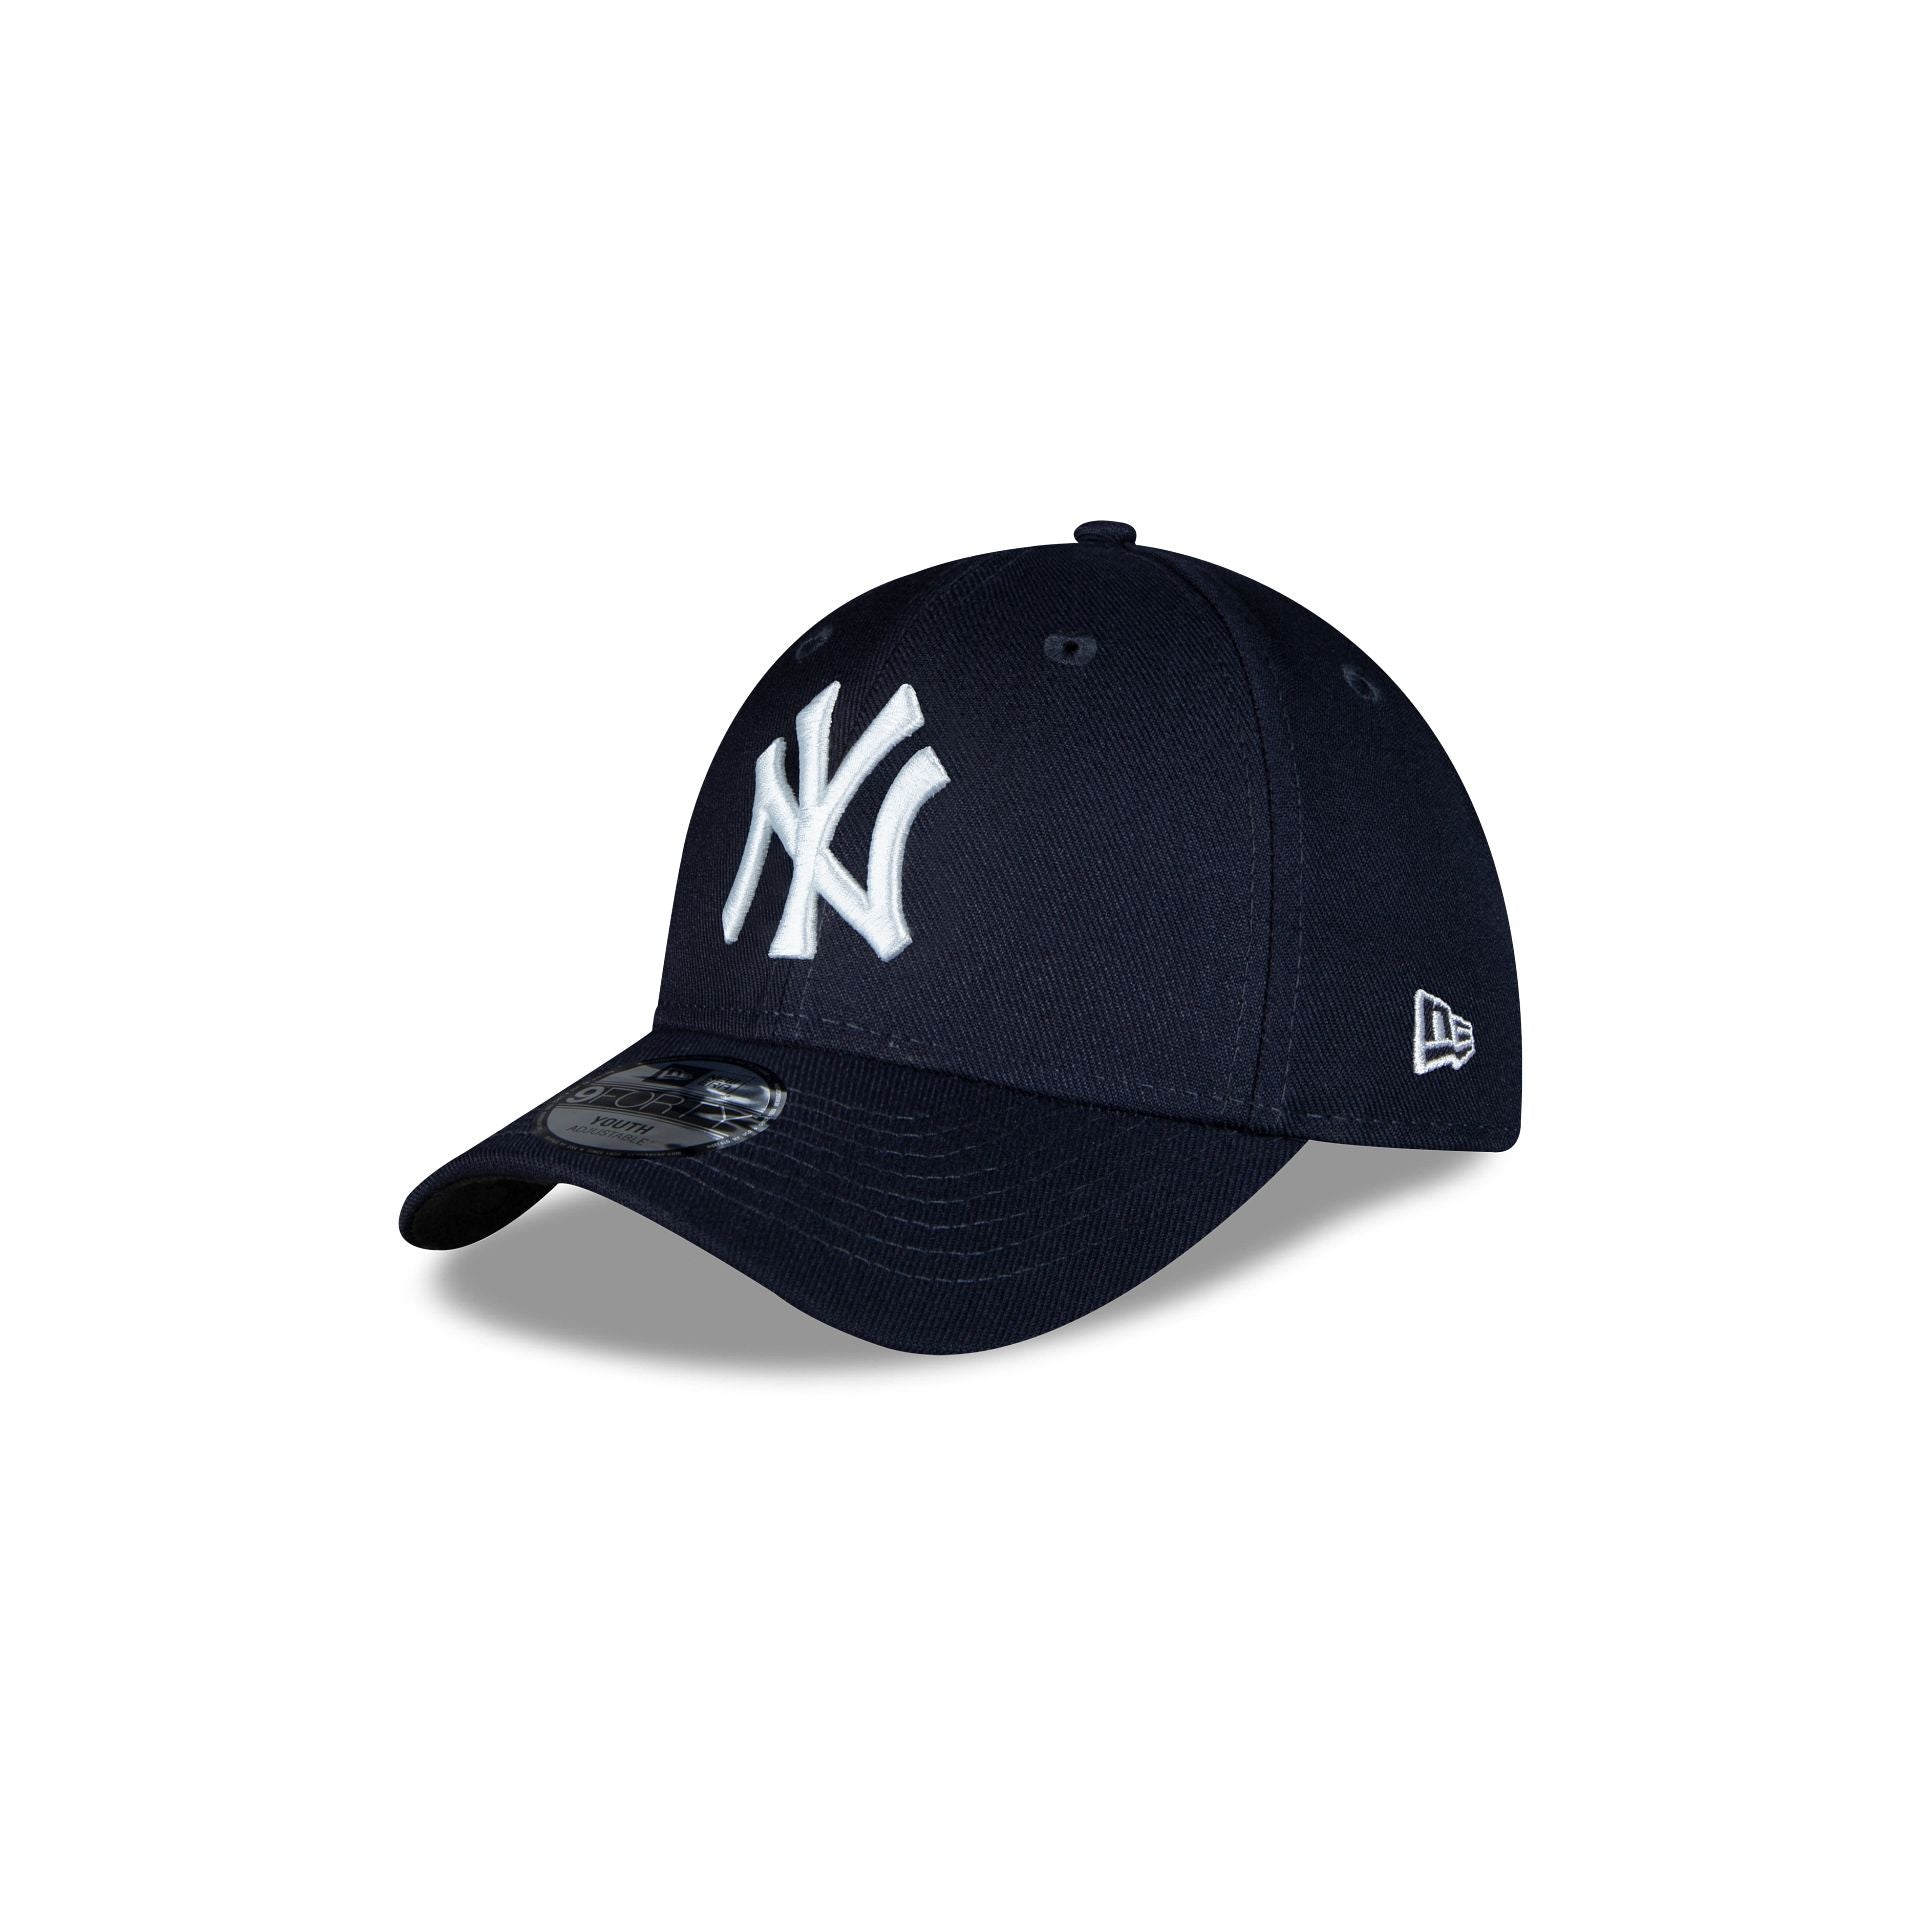 New York Yankees The League – 9FORTY Era New Cap Kids Adjustable Hat